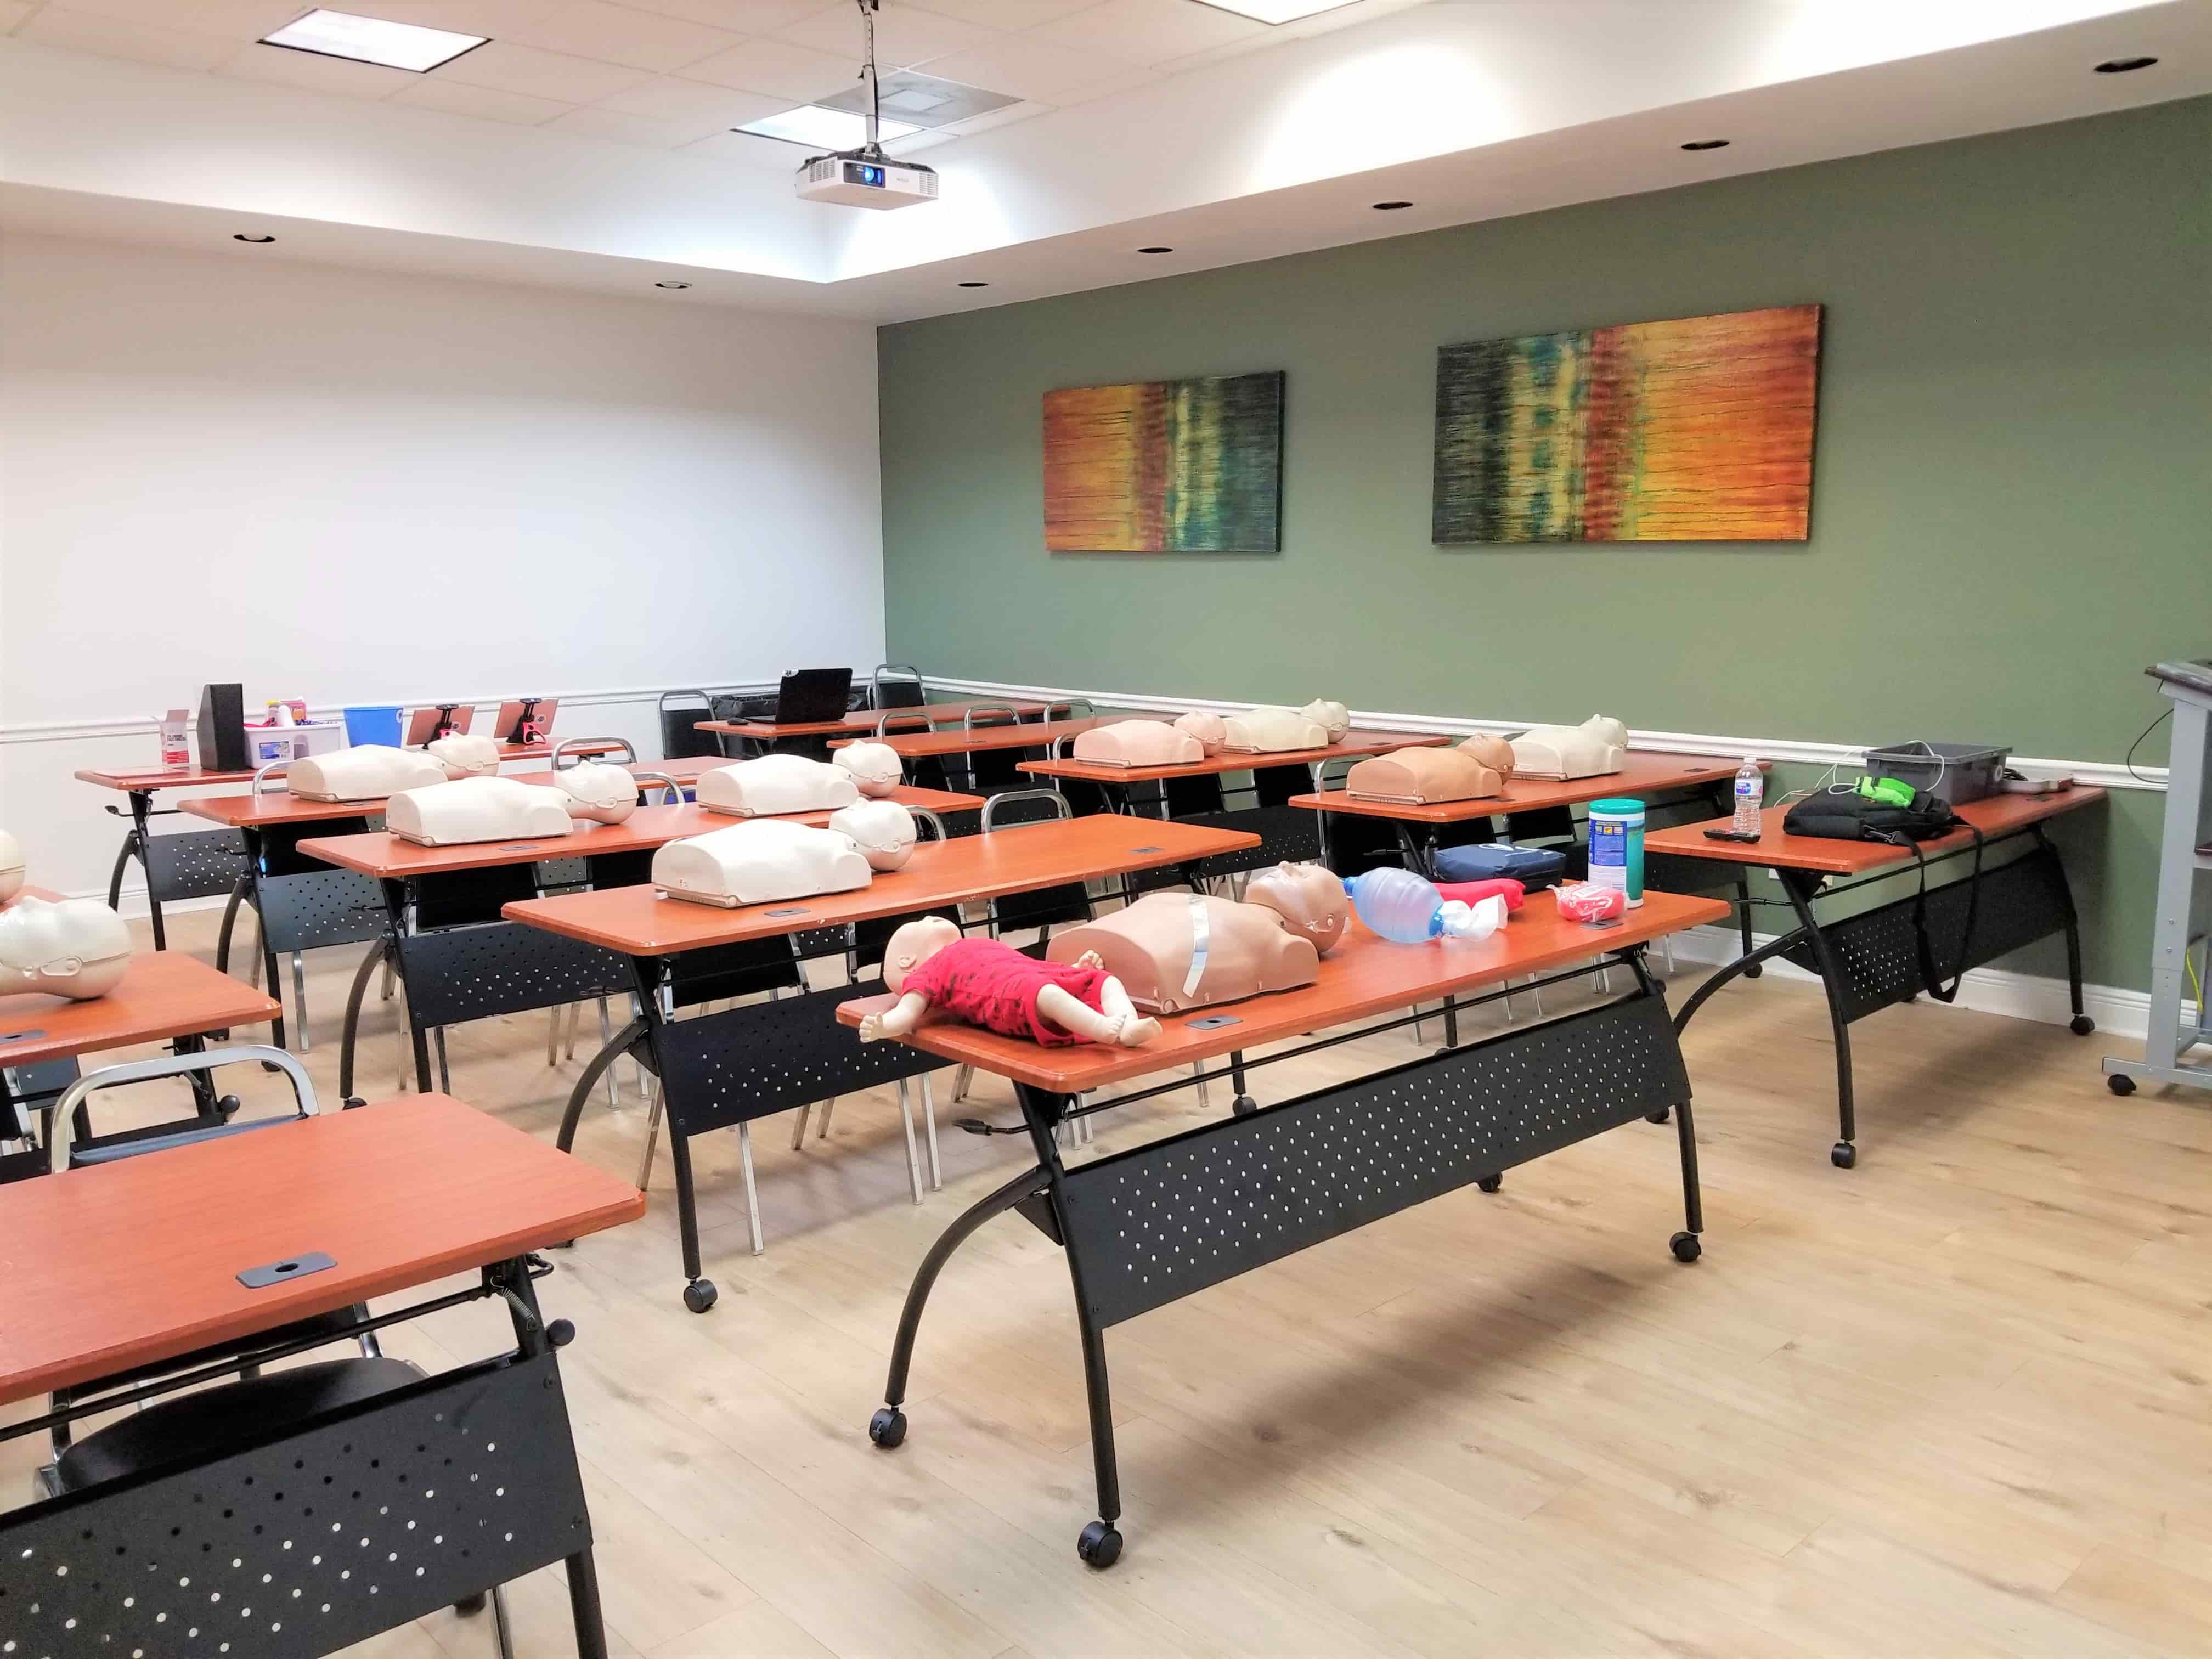 South Florida cpr bls first aid certification classes